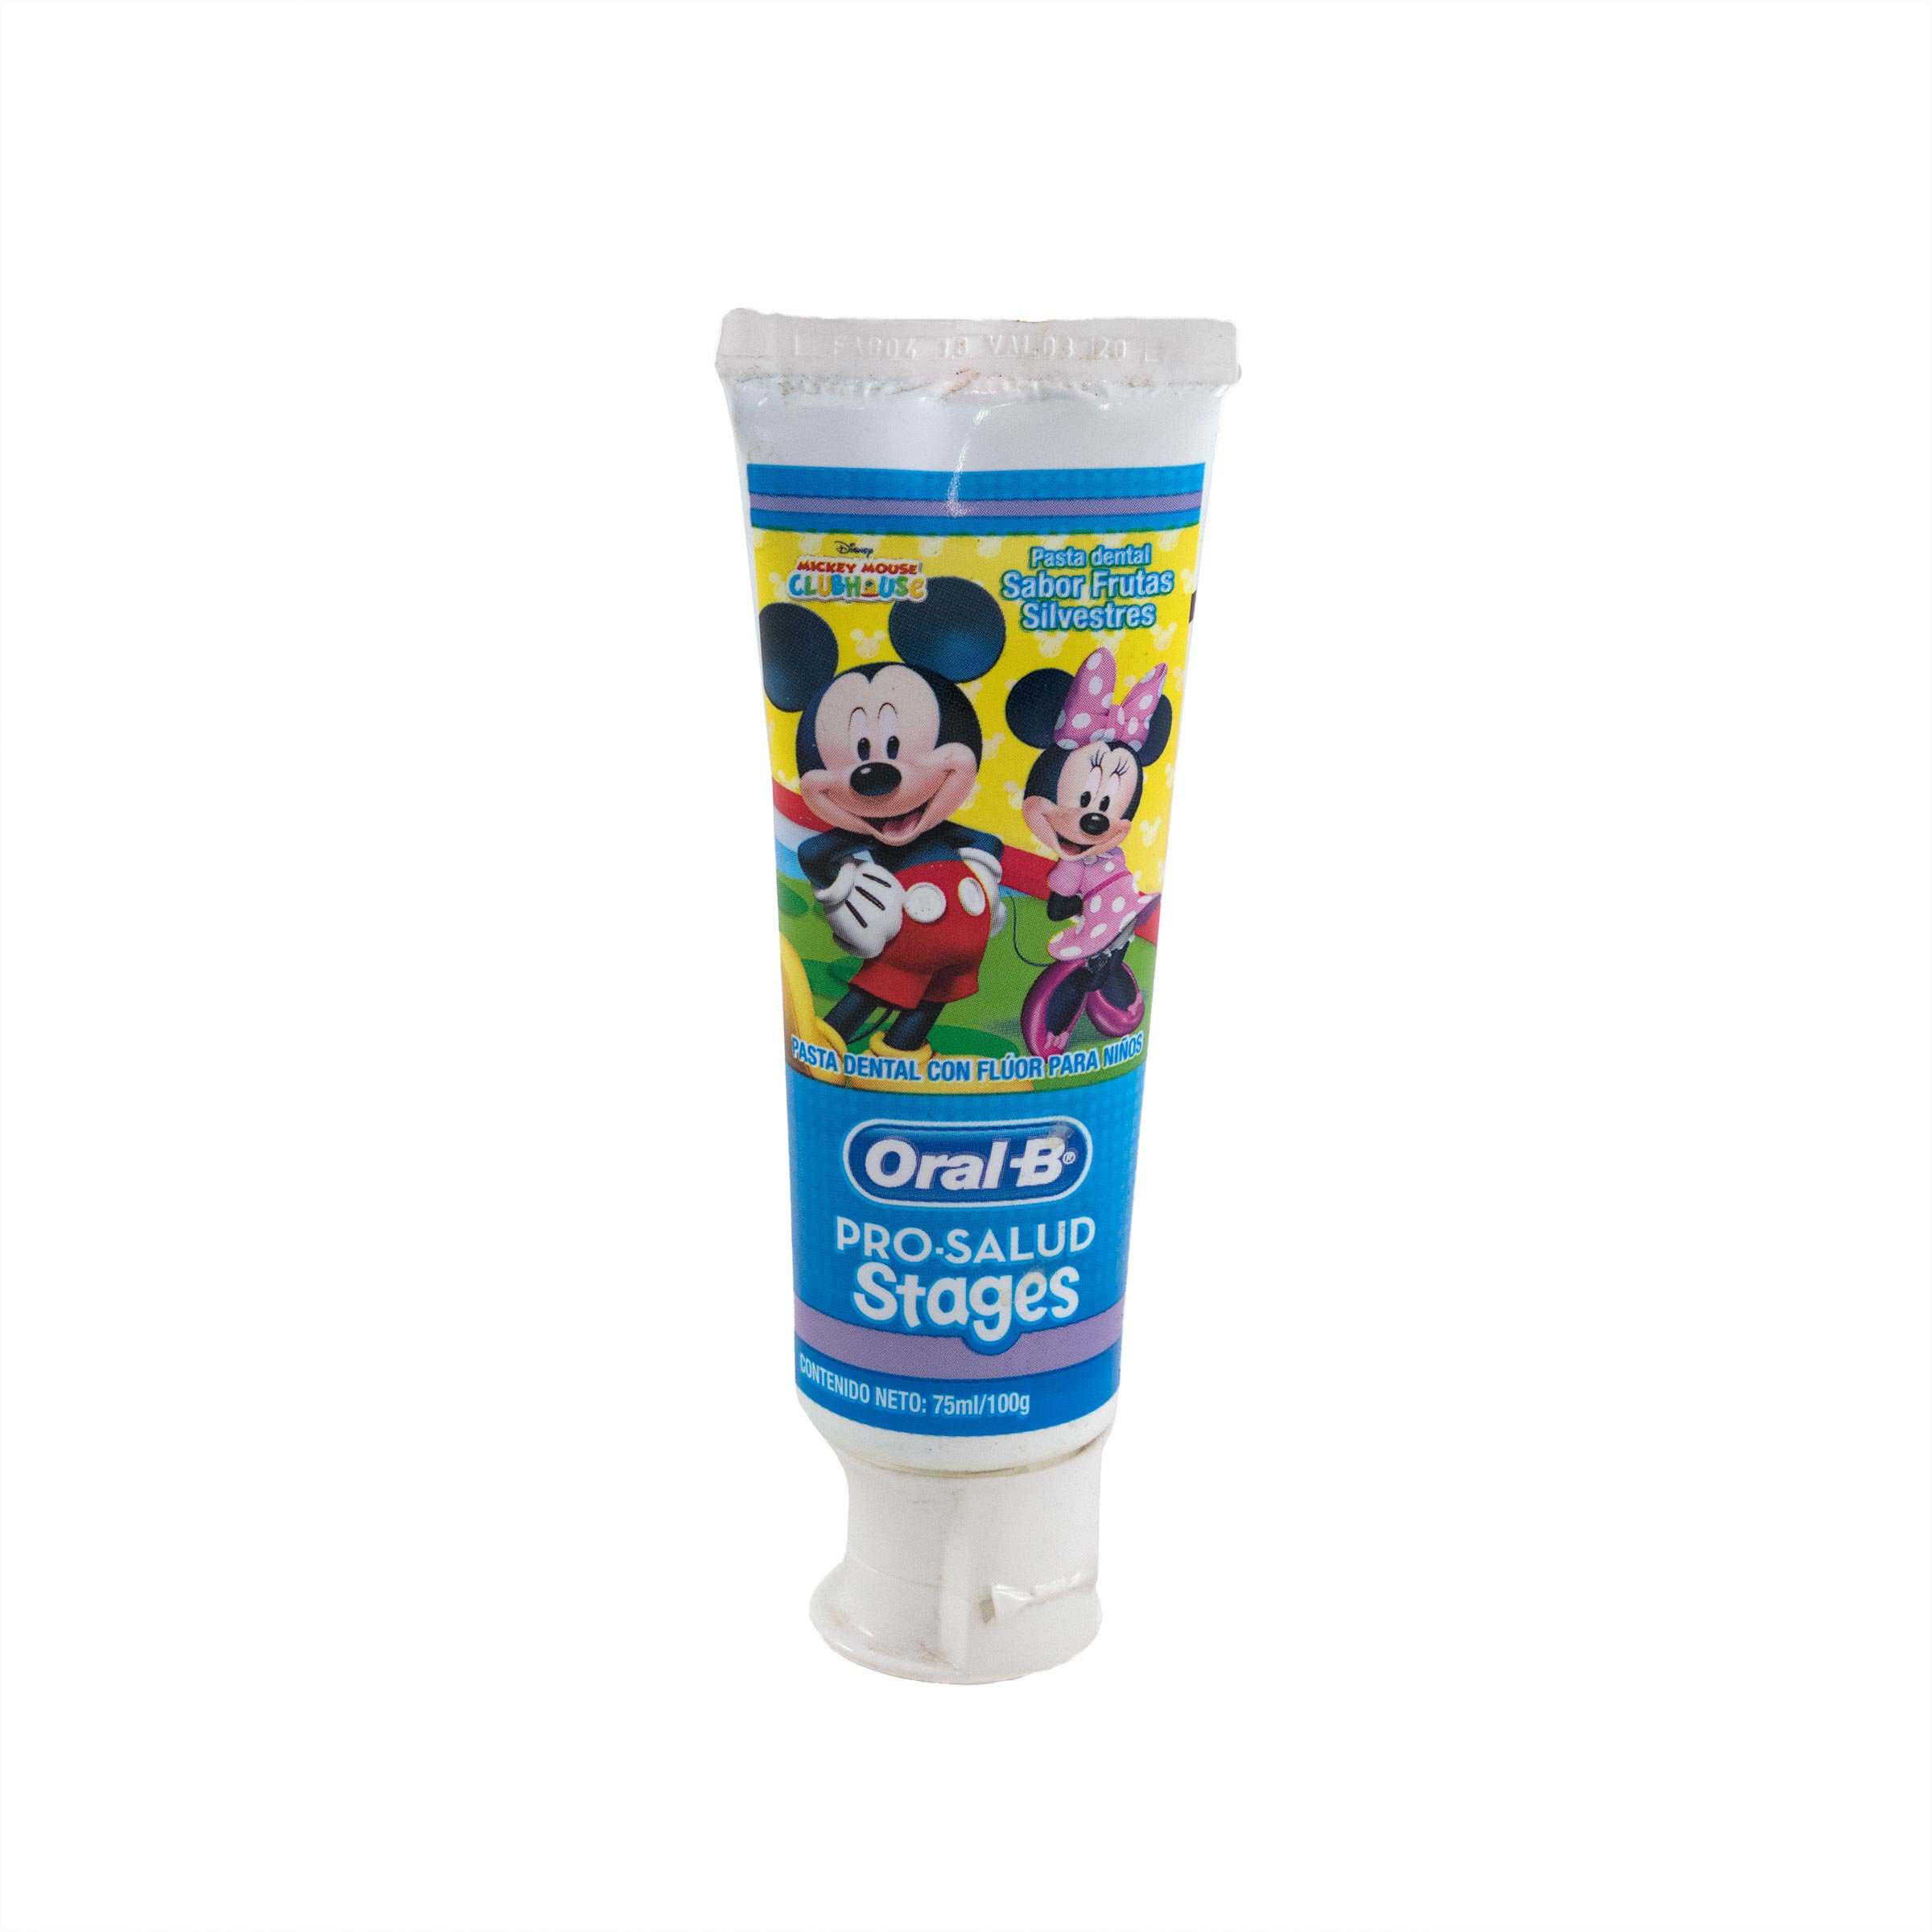 ORAL-B CR DENT STAGES 75 ML 9165